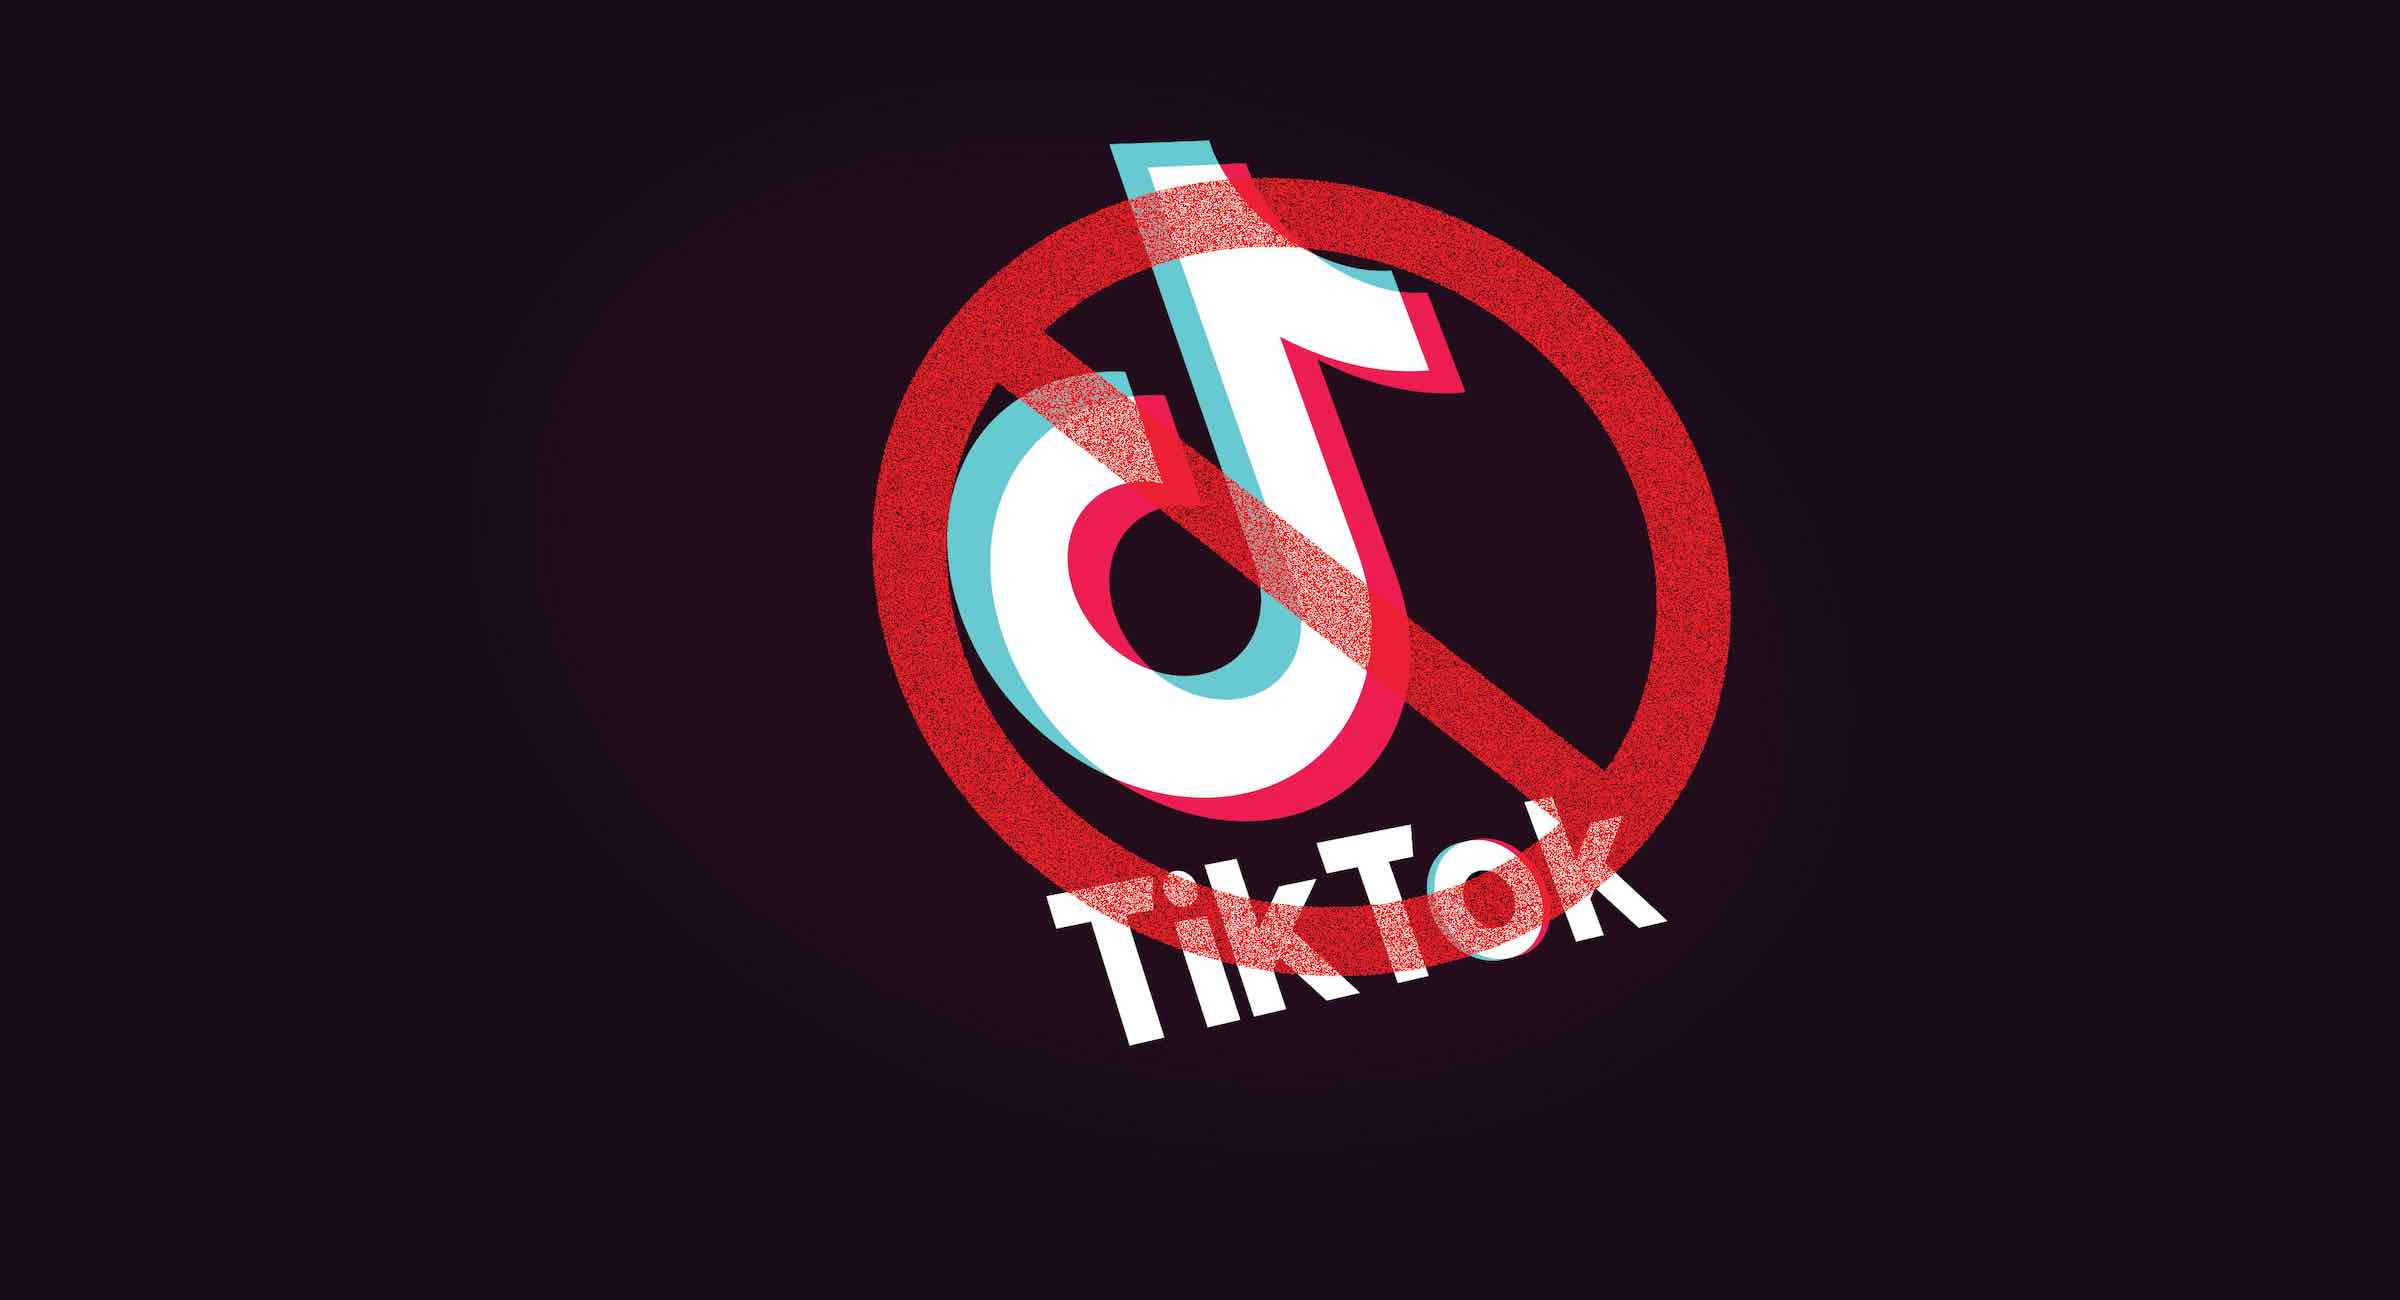 Is TikTok safe to use? These horror stories make us think it isn't